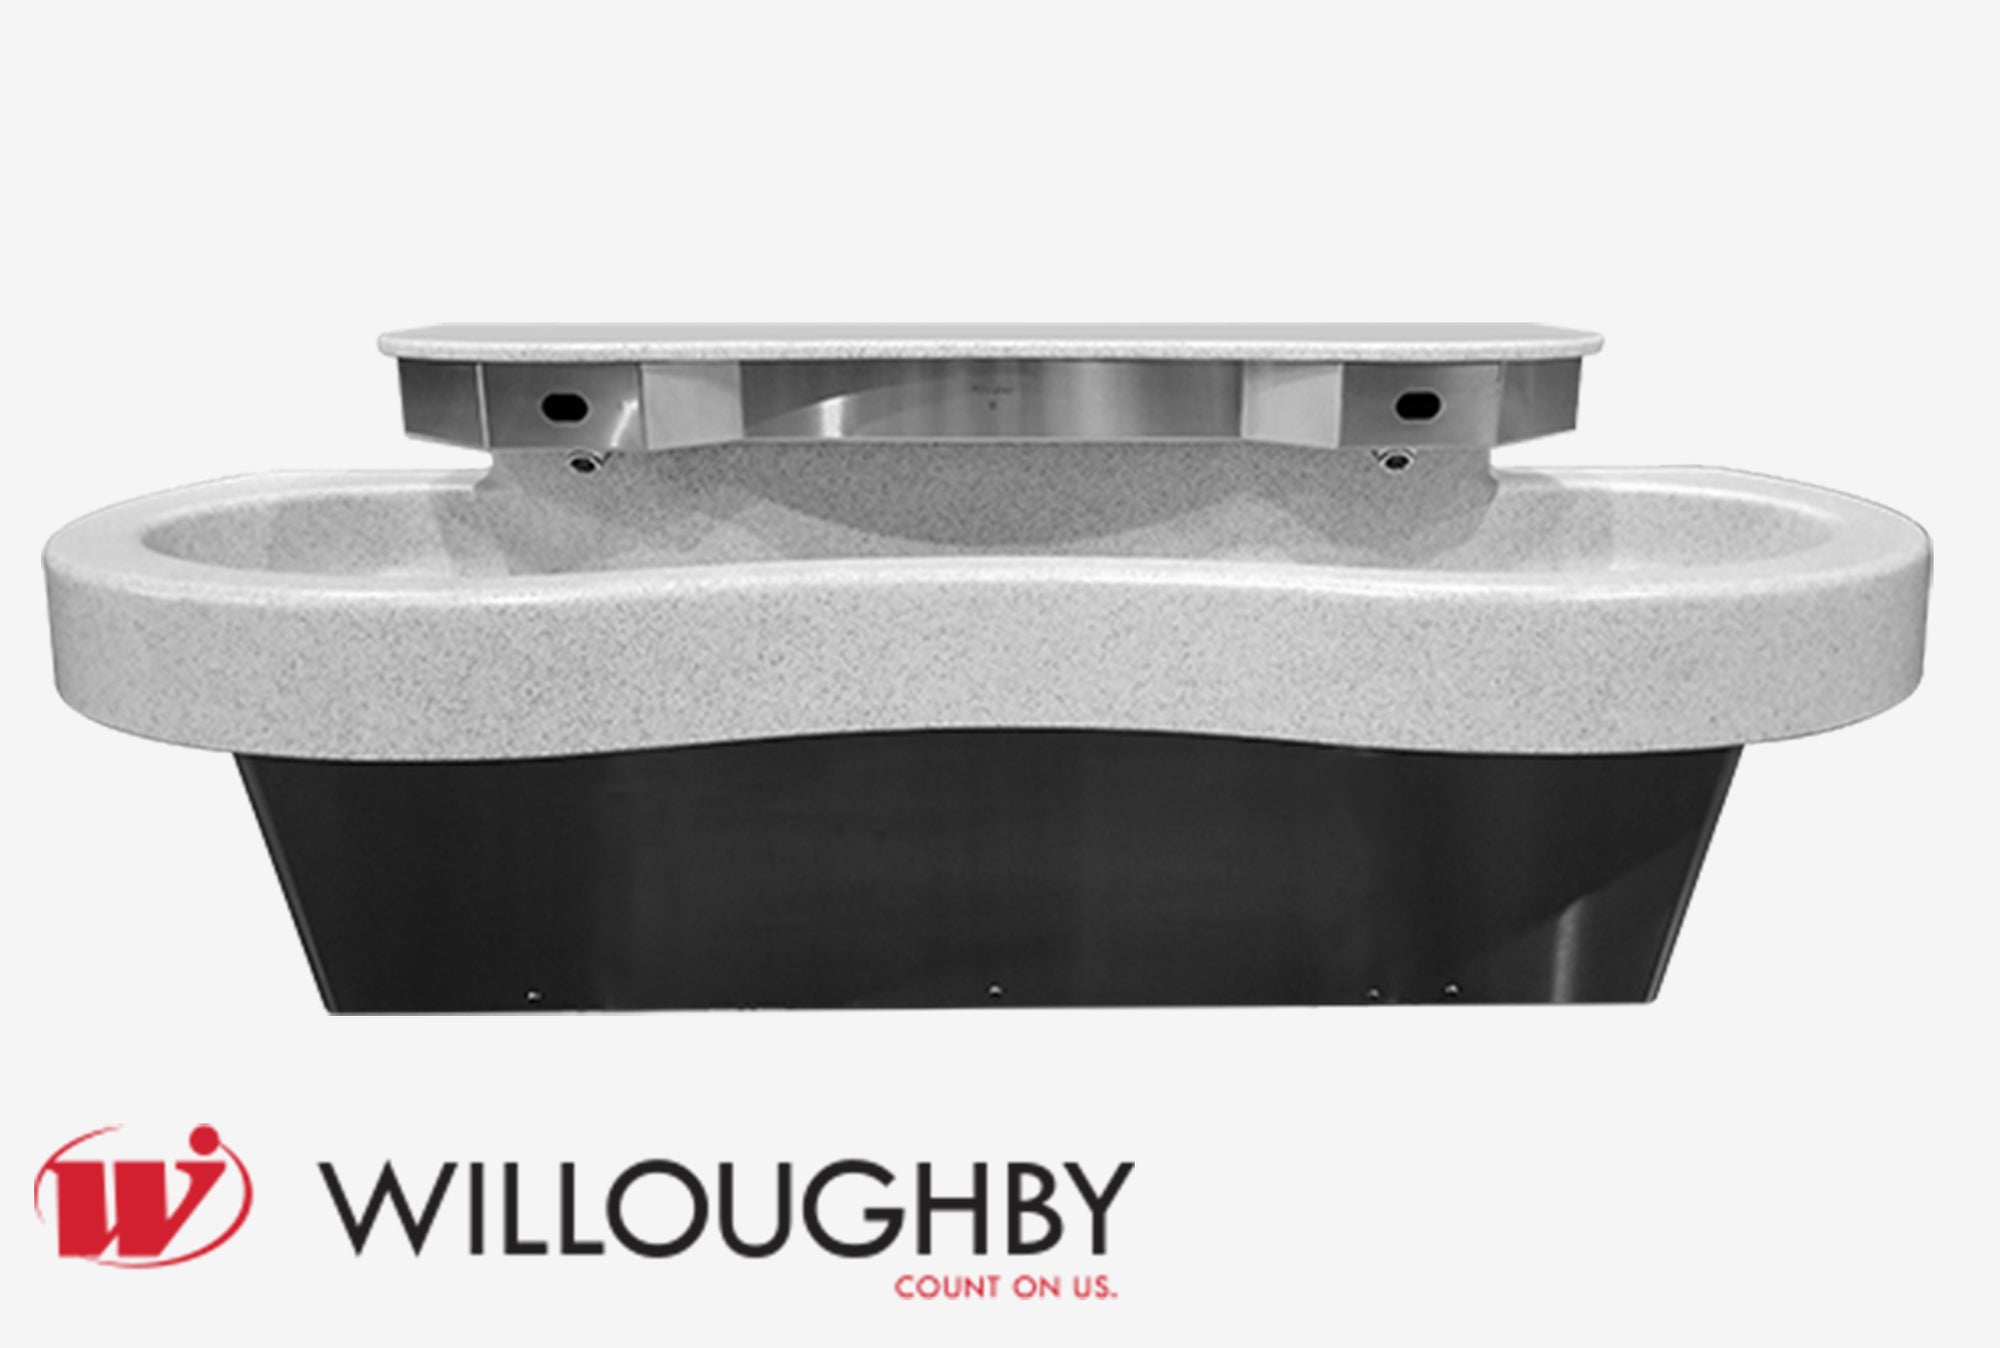 Willoughby Sinks